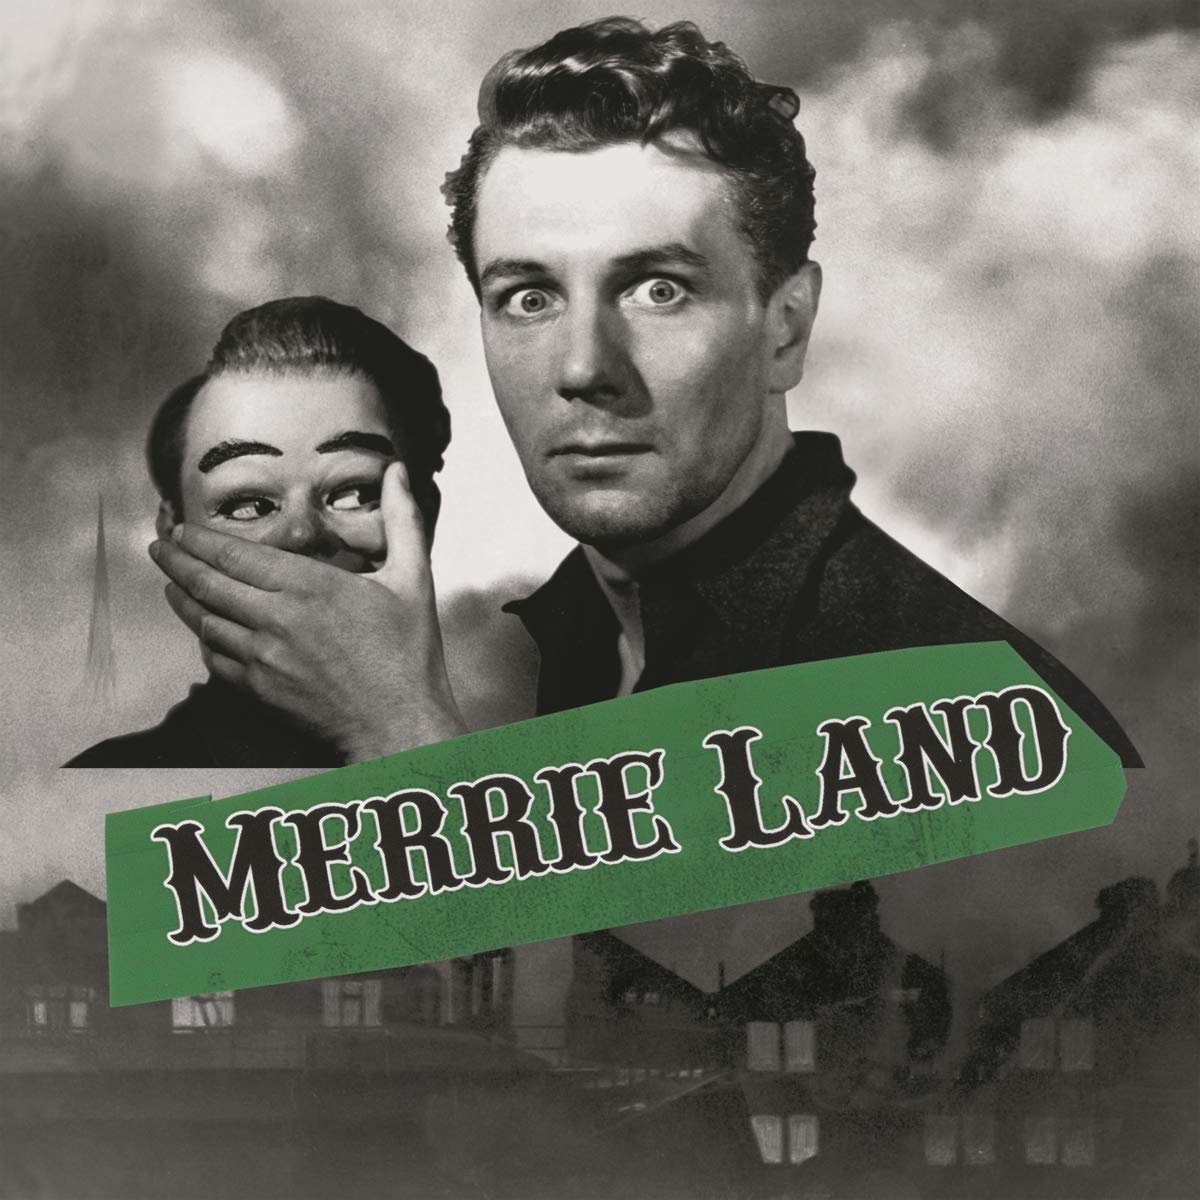 The Good, The Bad & The Queen - Merrie Land - CD